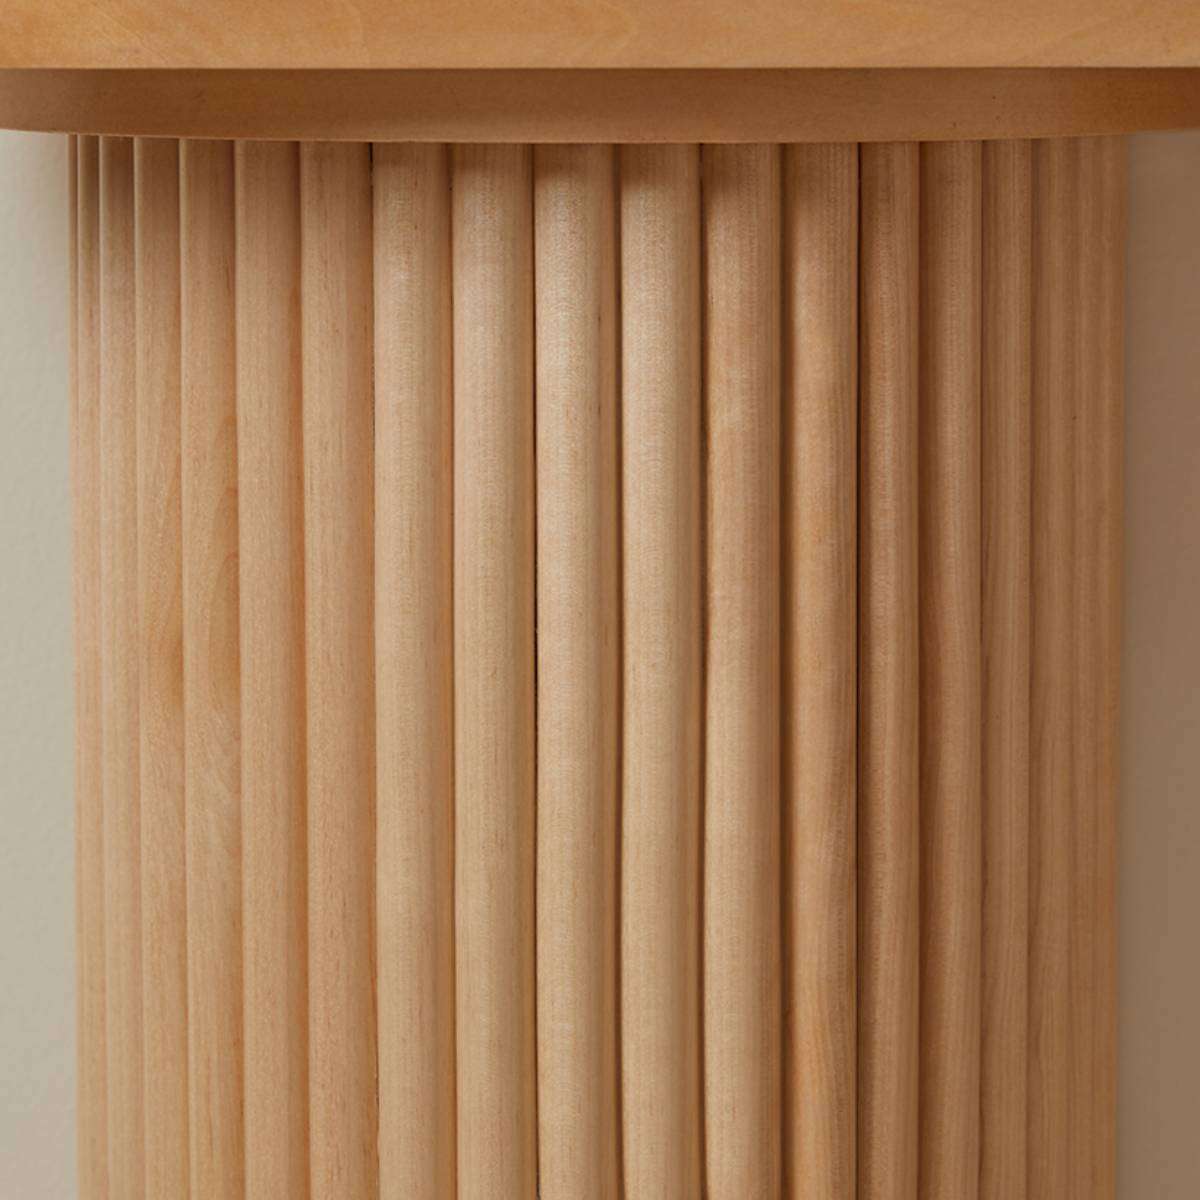 Eve Console Table - Birch